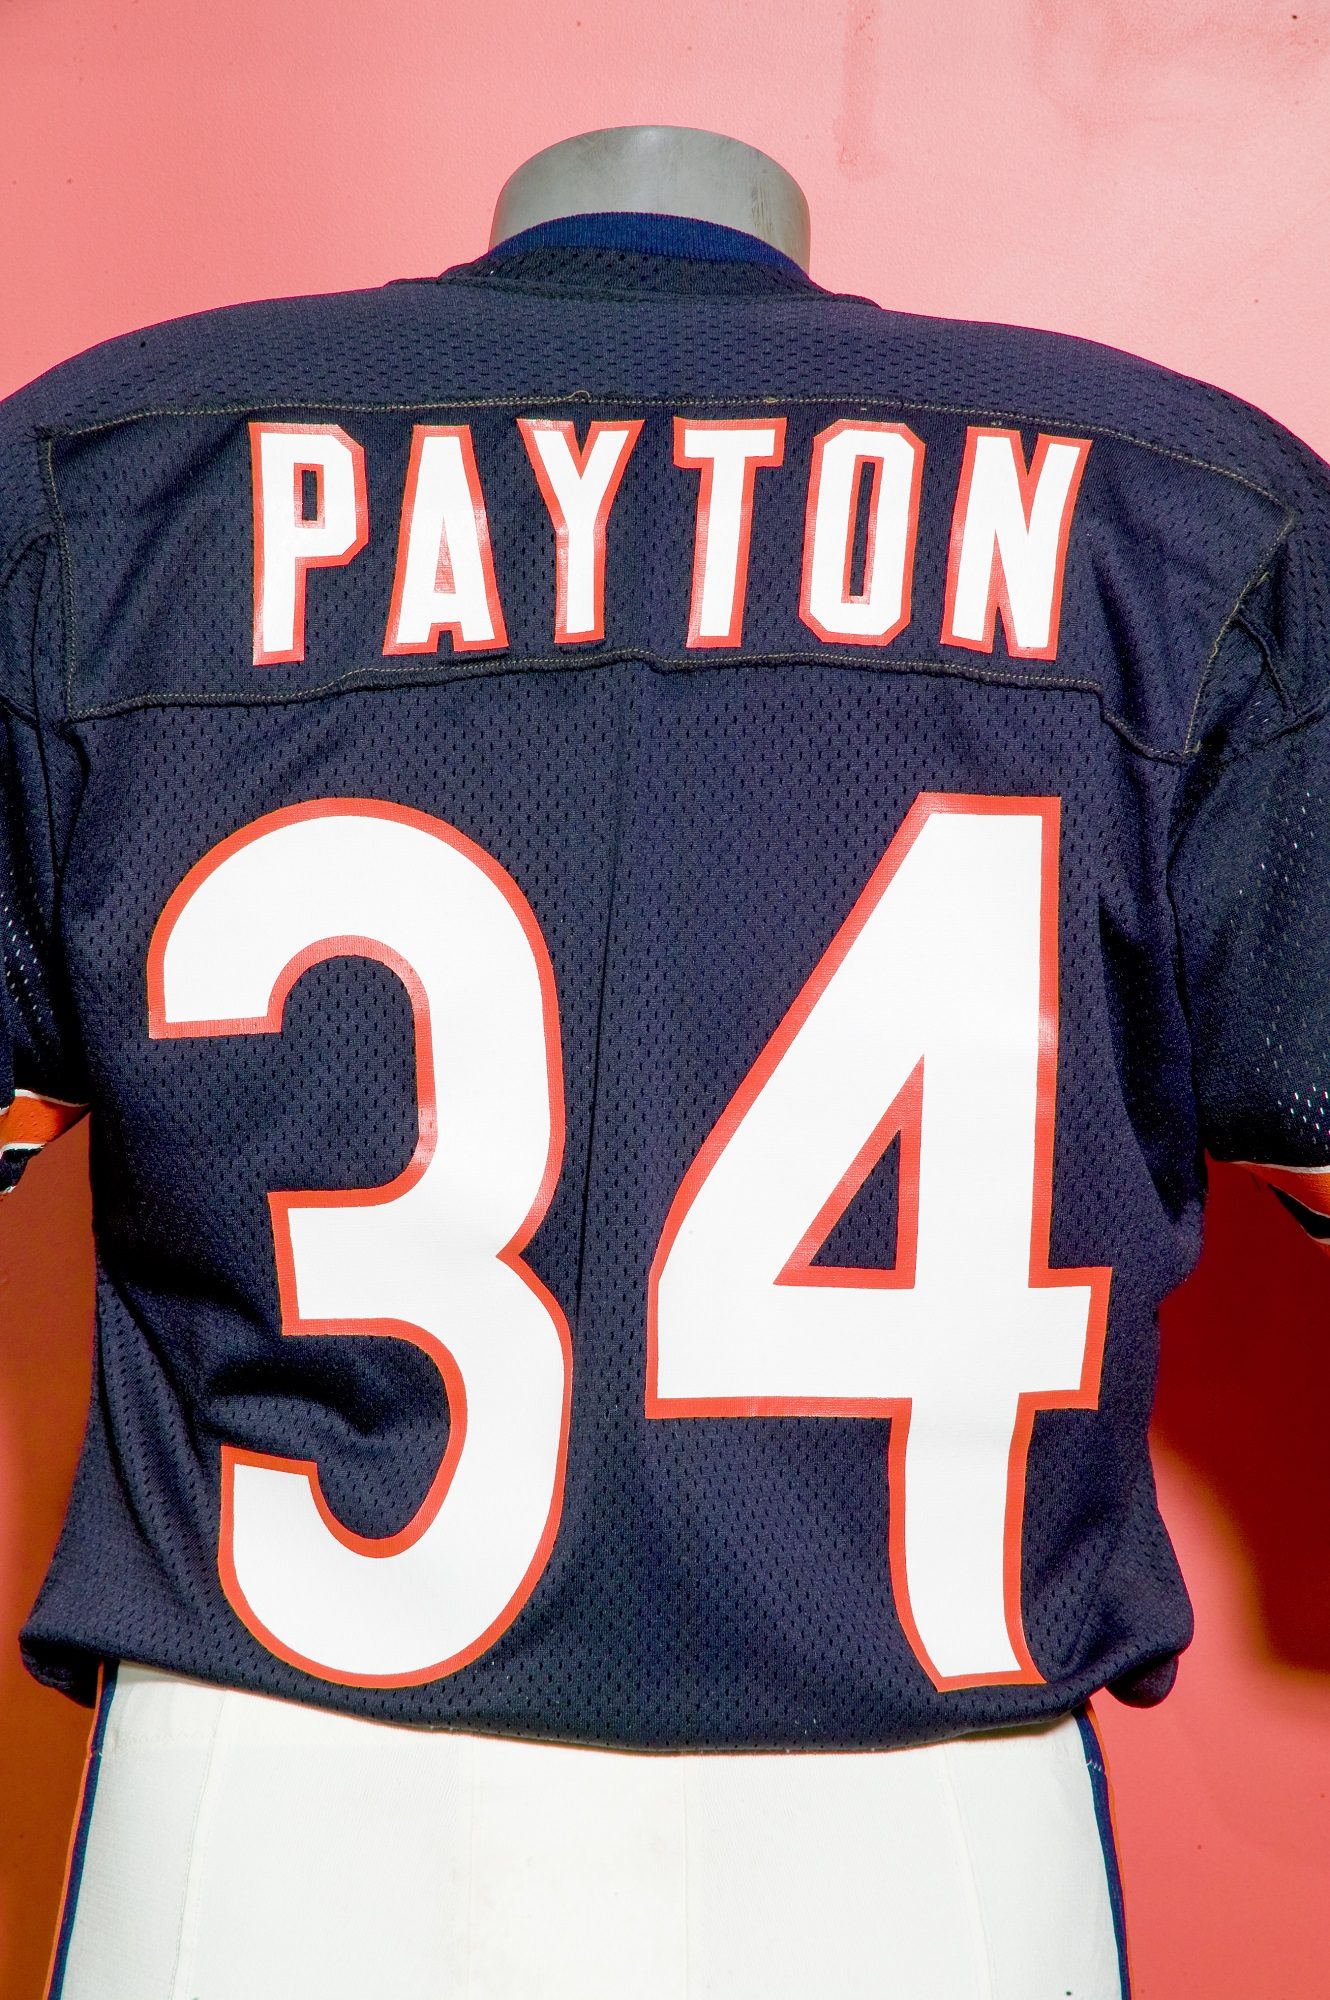 Walter Payton's football jersey, number 34